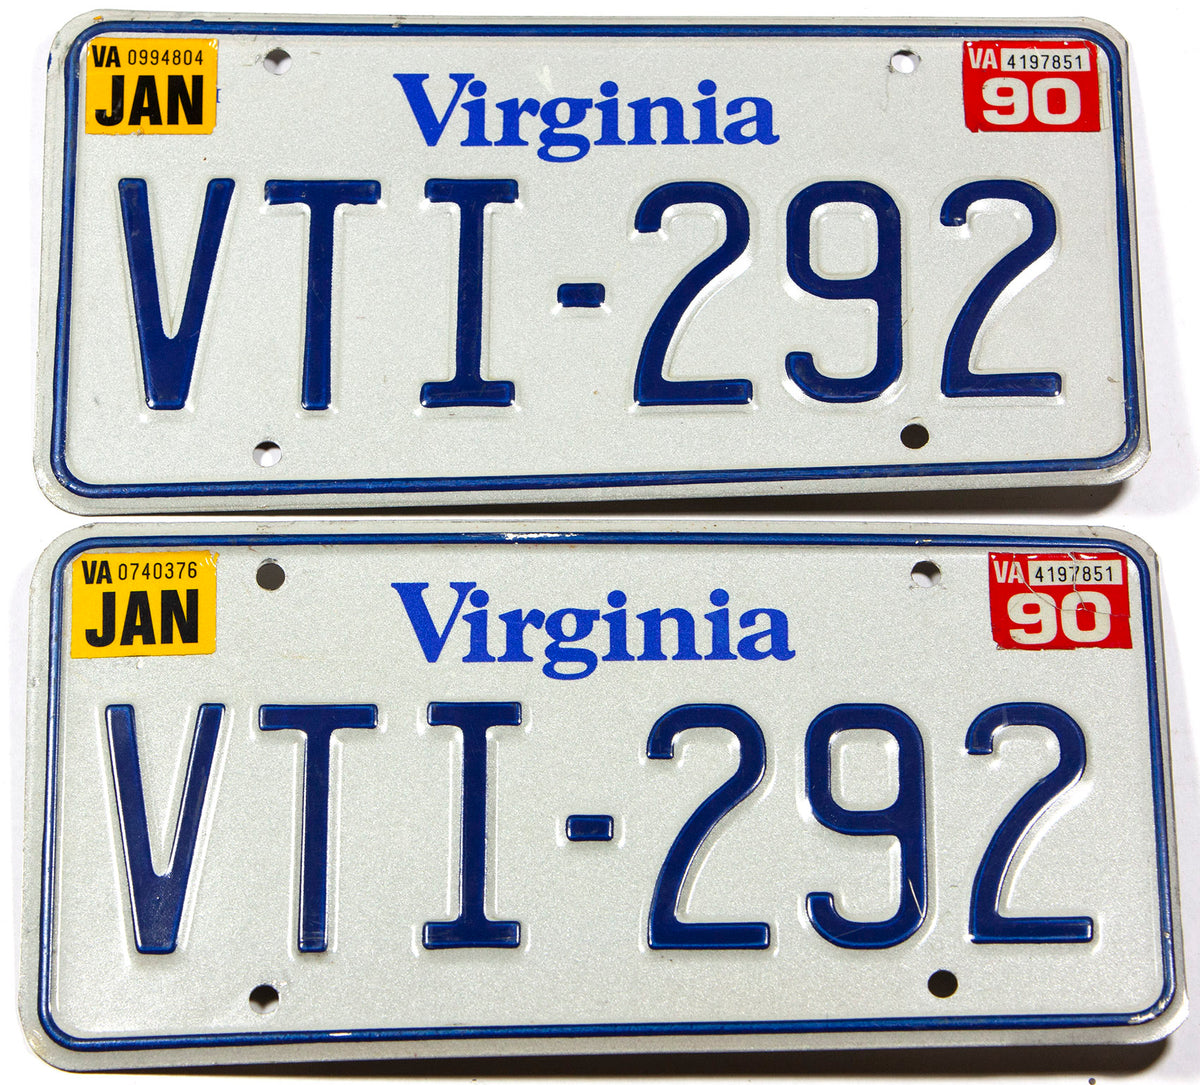 A Classic pair of 1990 Virginia car license plates in excellent minus condition